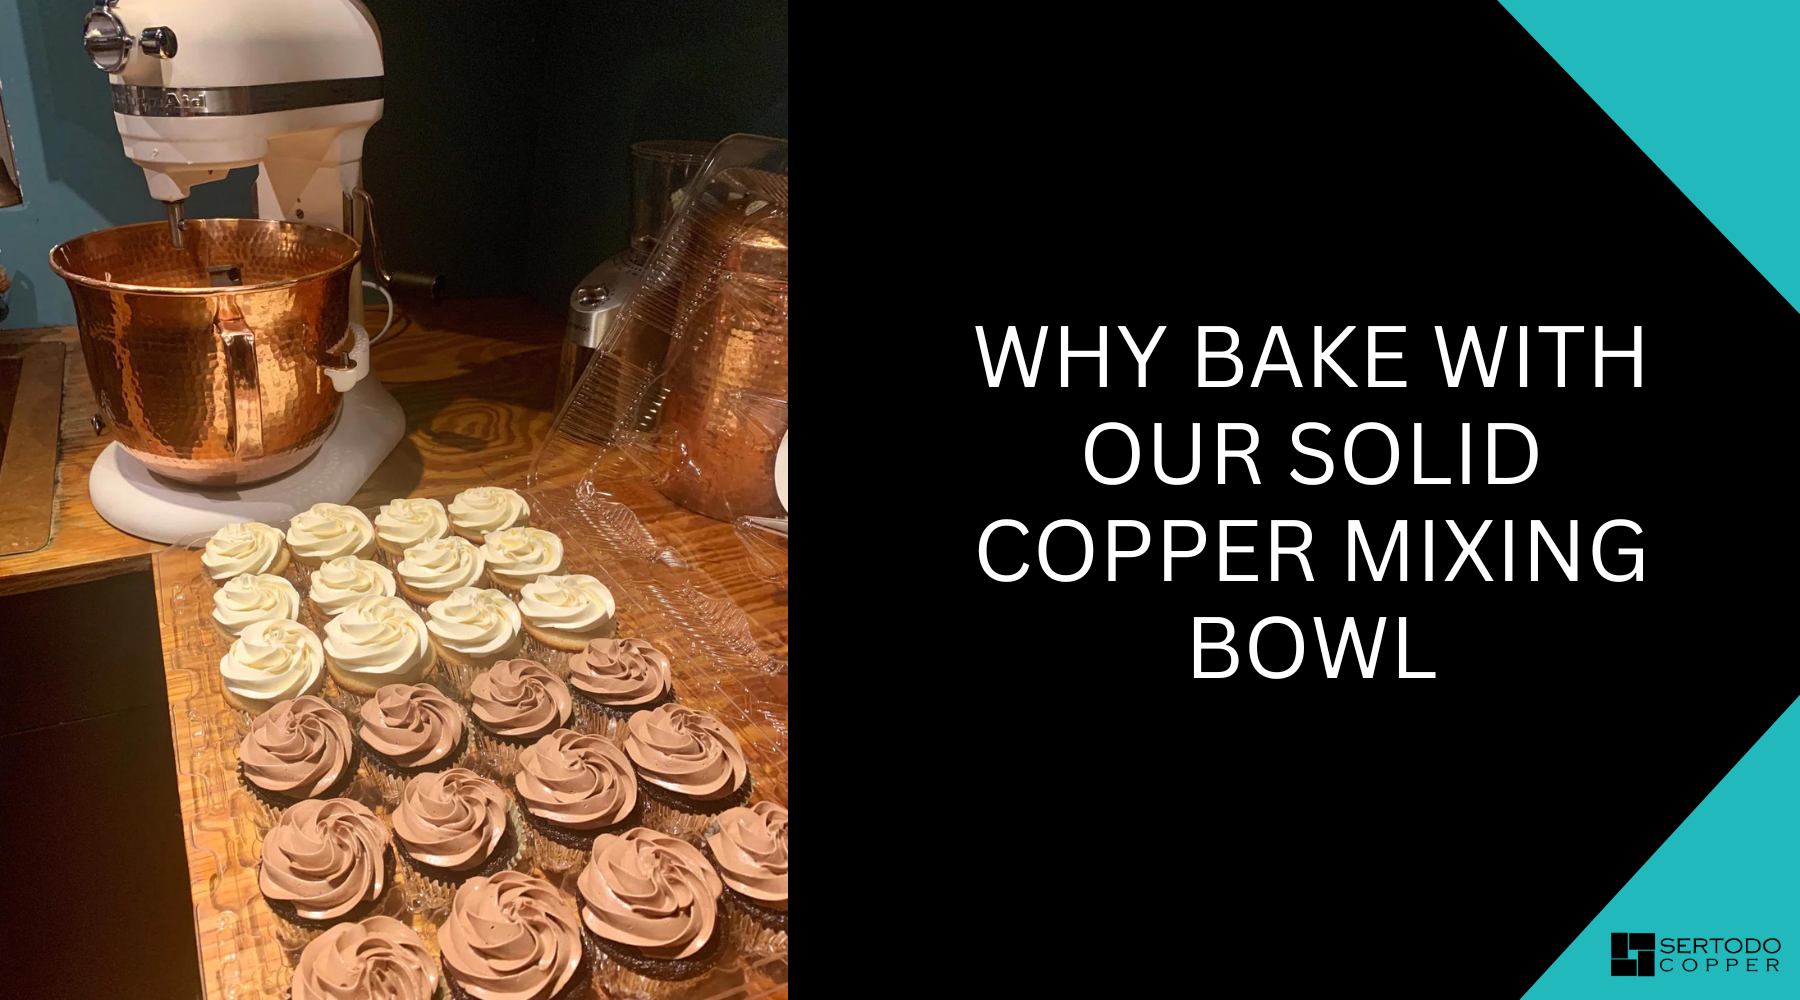 Why bake with solid copper mixing bowl